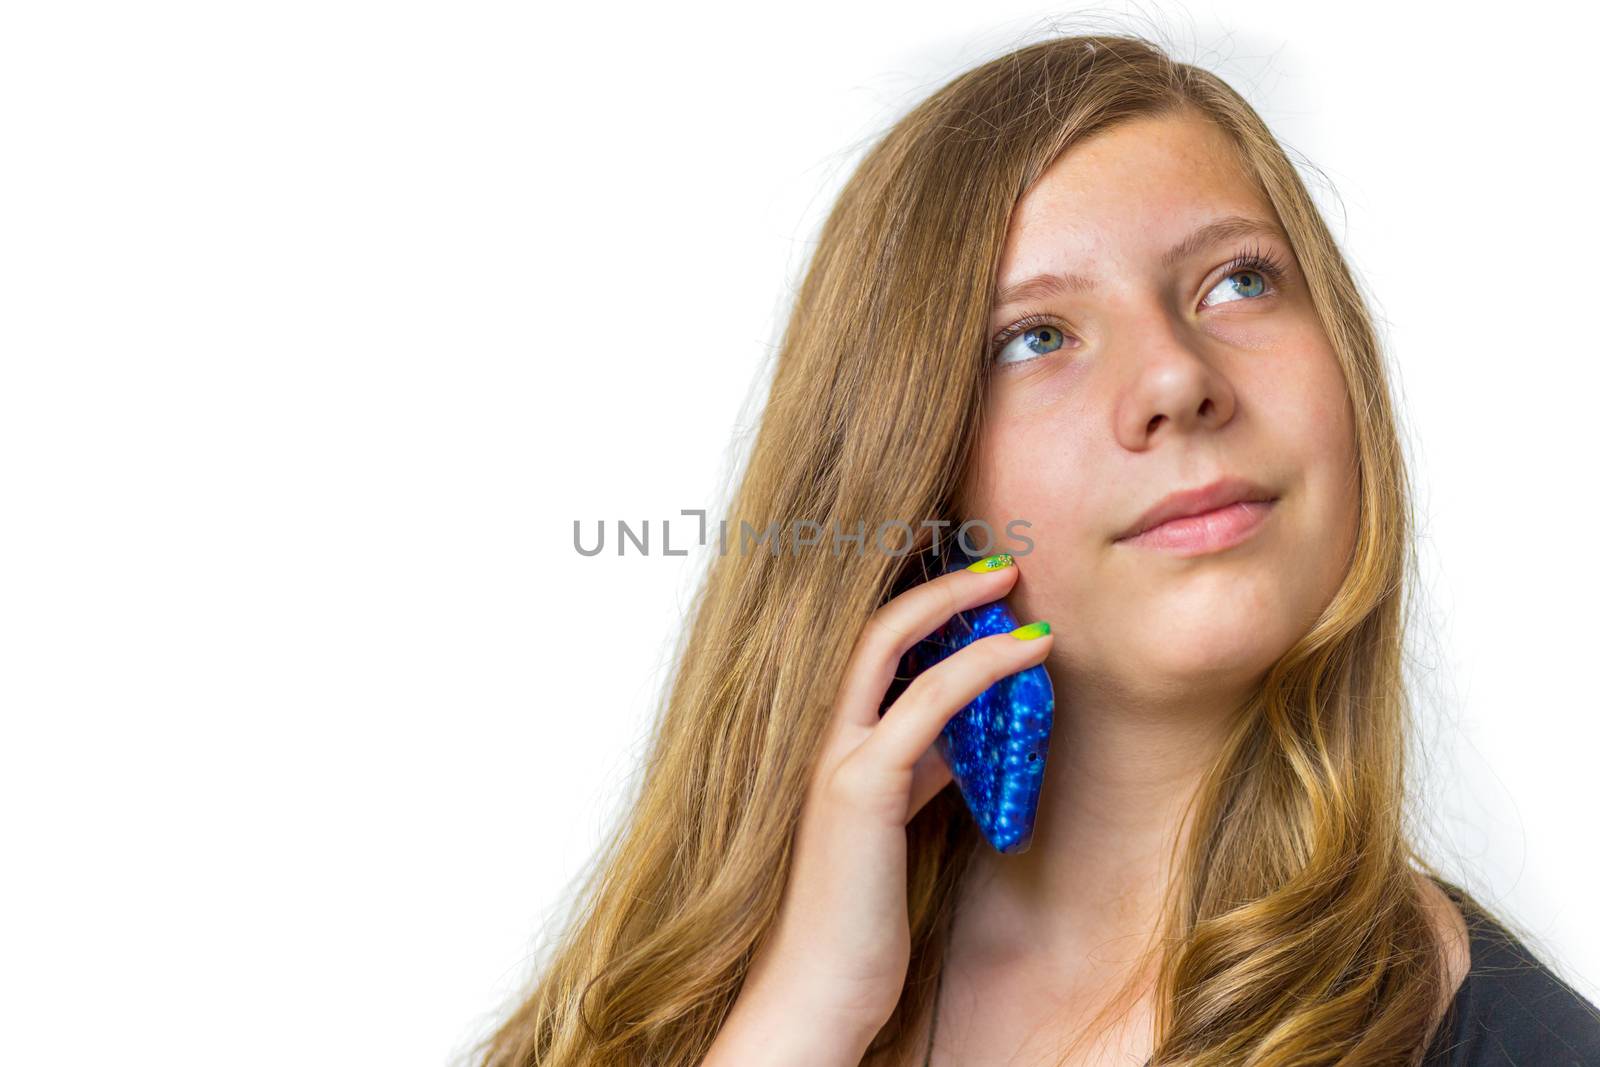 Caucasian teenage girl with long blonde hair calling with mobile telephone isolated on white background